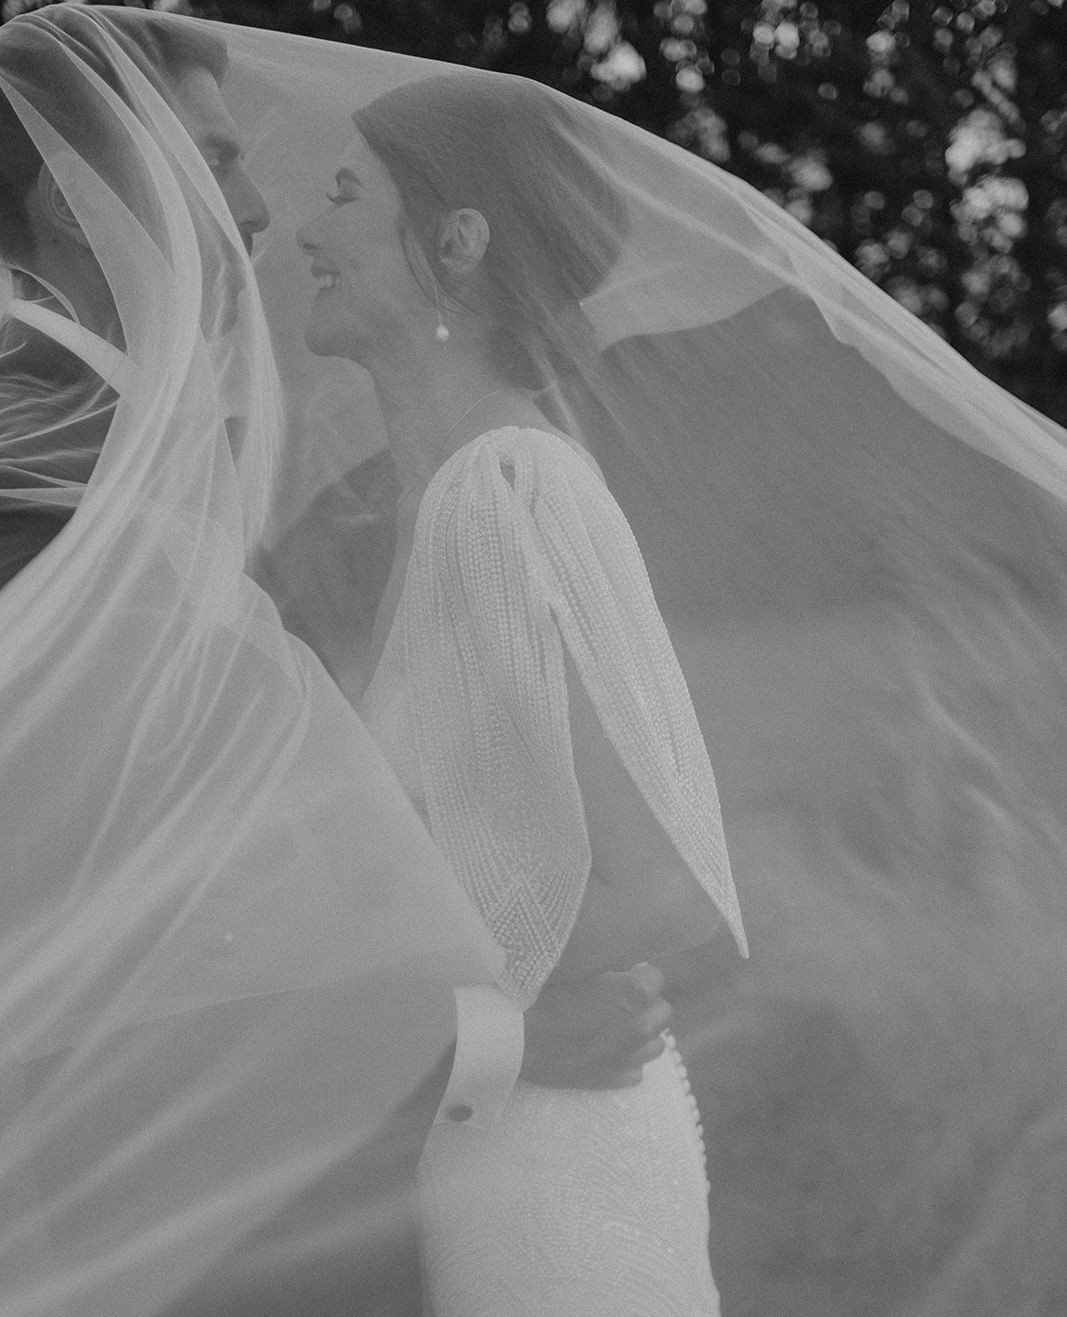 Embracing forever under a veil of romance &ndash; we are in awe of our #ACbride in the Finley gown with petal sleeves. ⁠
⁠
Photo @_piaphoto ⁠
Venue @mudbrick_weddings @mudbrick_nz ⁠
Gown @annacampbellbridal by @paperswanbride ⁠
Jewelry @kiriandbelle 